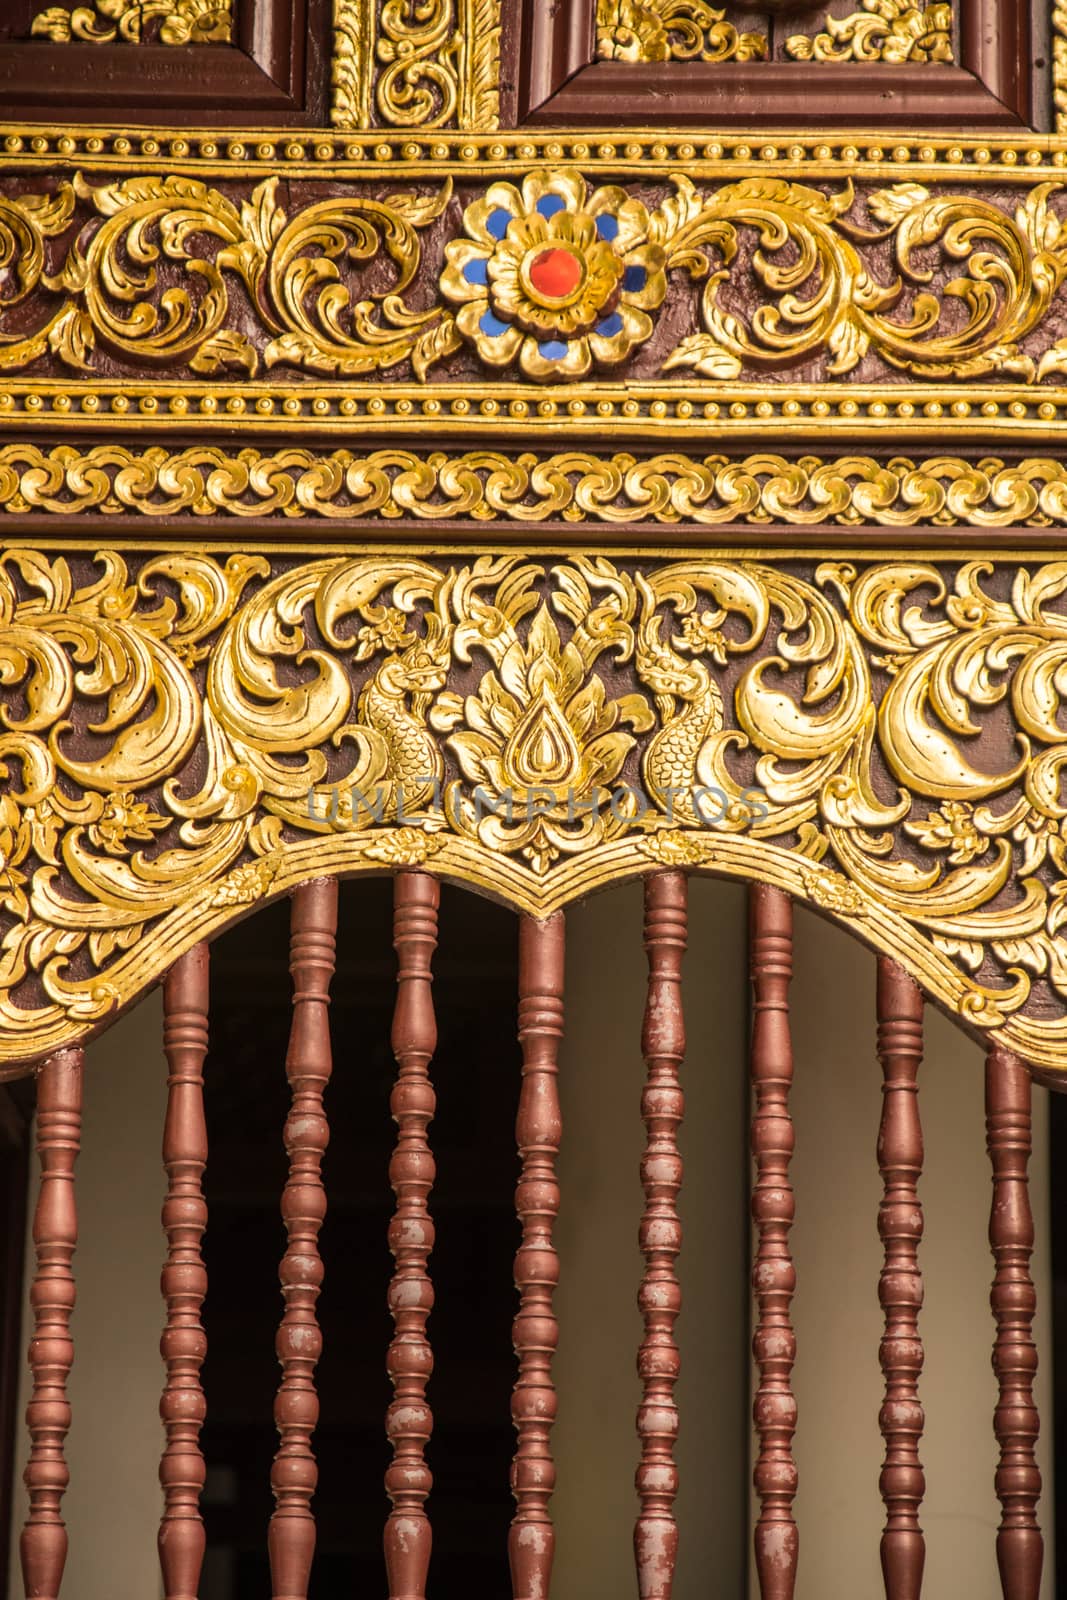 detail of wood carving with thai pattern on natural wood plate for decorated temple,Thailand